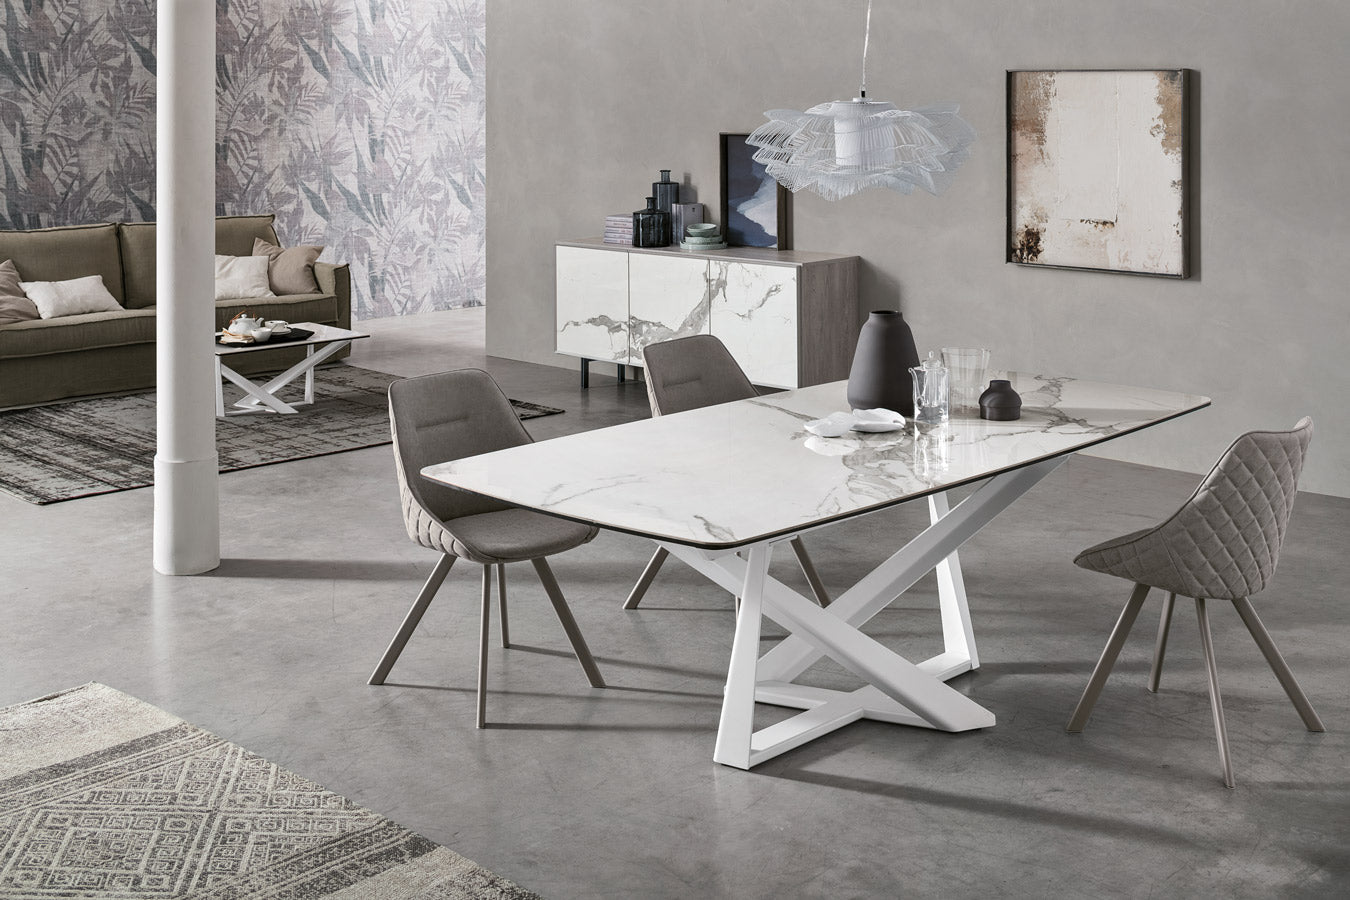 TARGET POINT PRIAMO 230 Fixed Dining Table with Porcelain Top